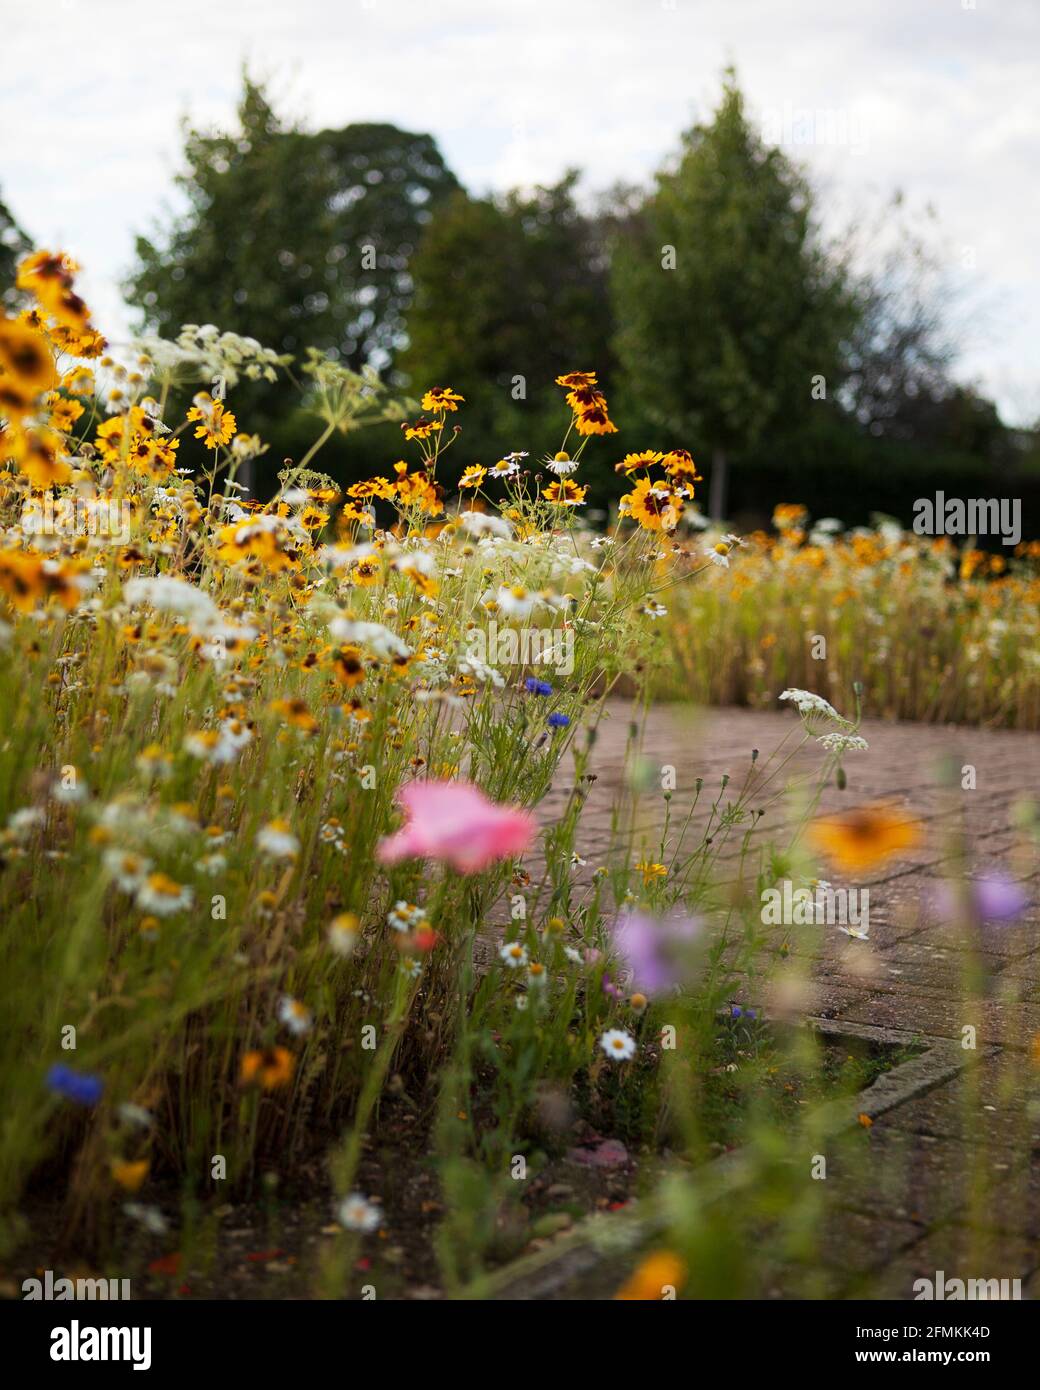 Wildflowers including black eyed Susan (Rudbeckia), cornflowers (Centaurea cyanus) and daisies growing in a garden border next to block paved paths Stock Photo